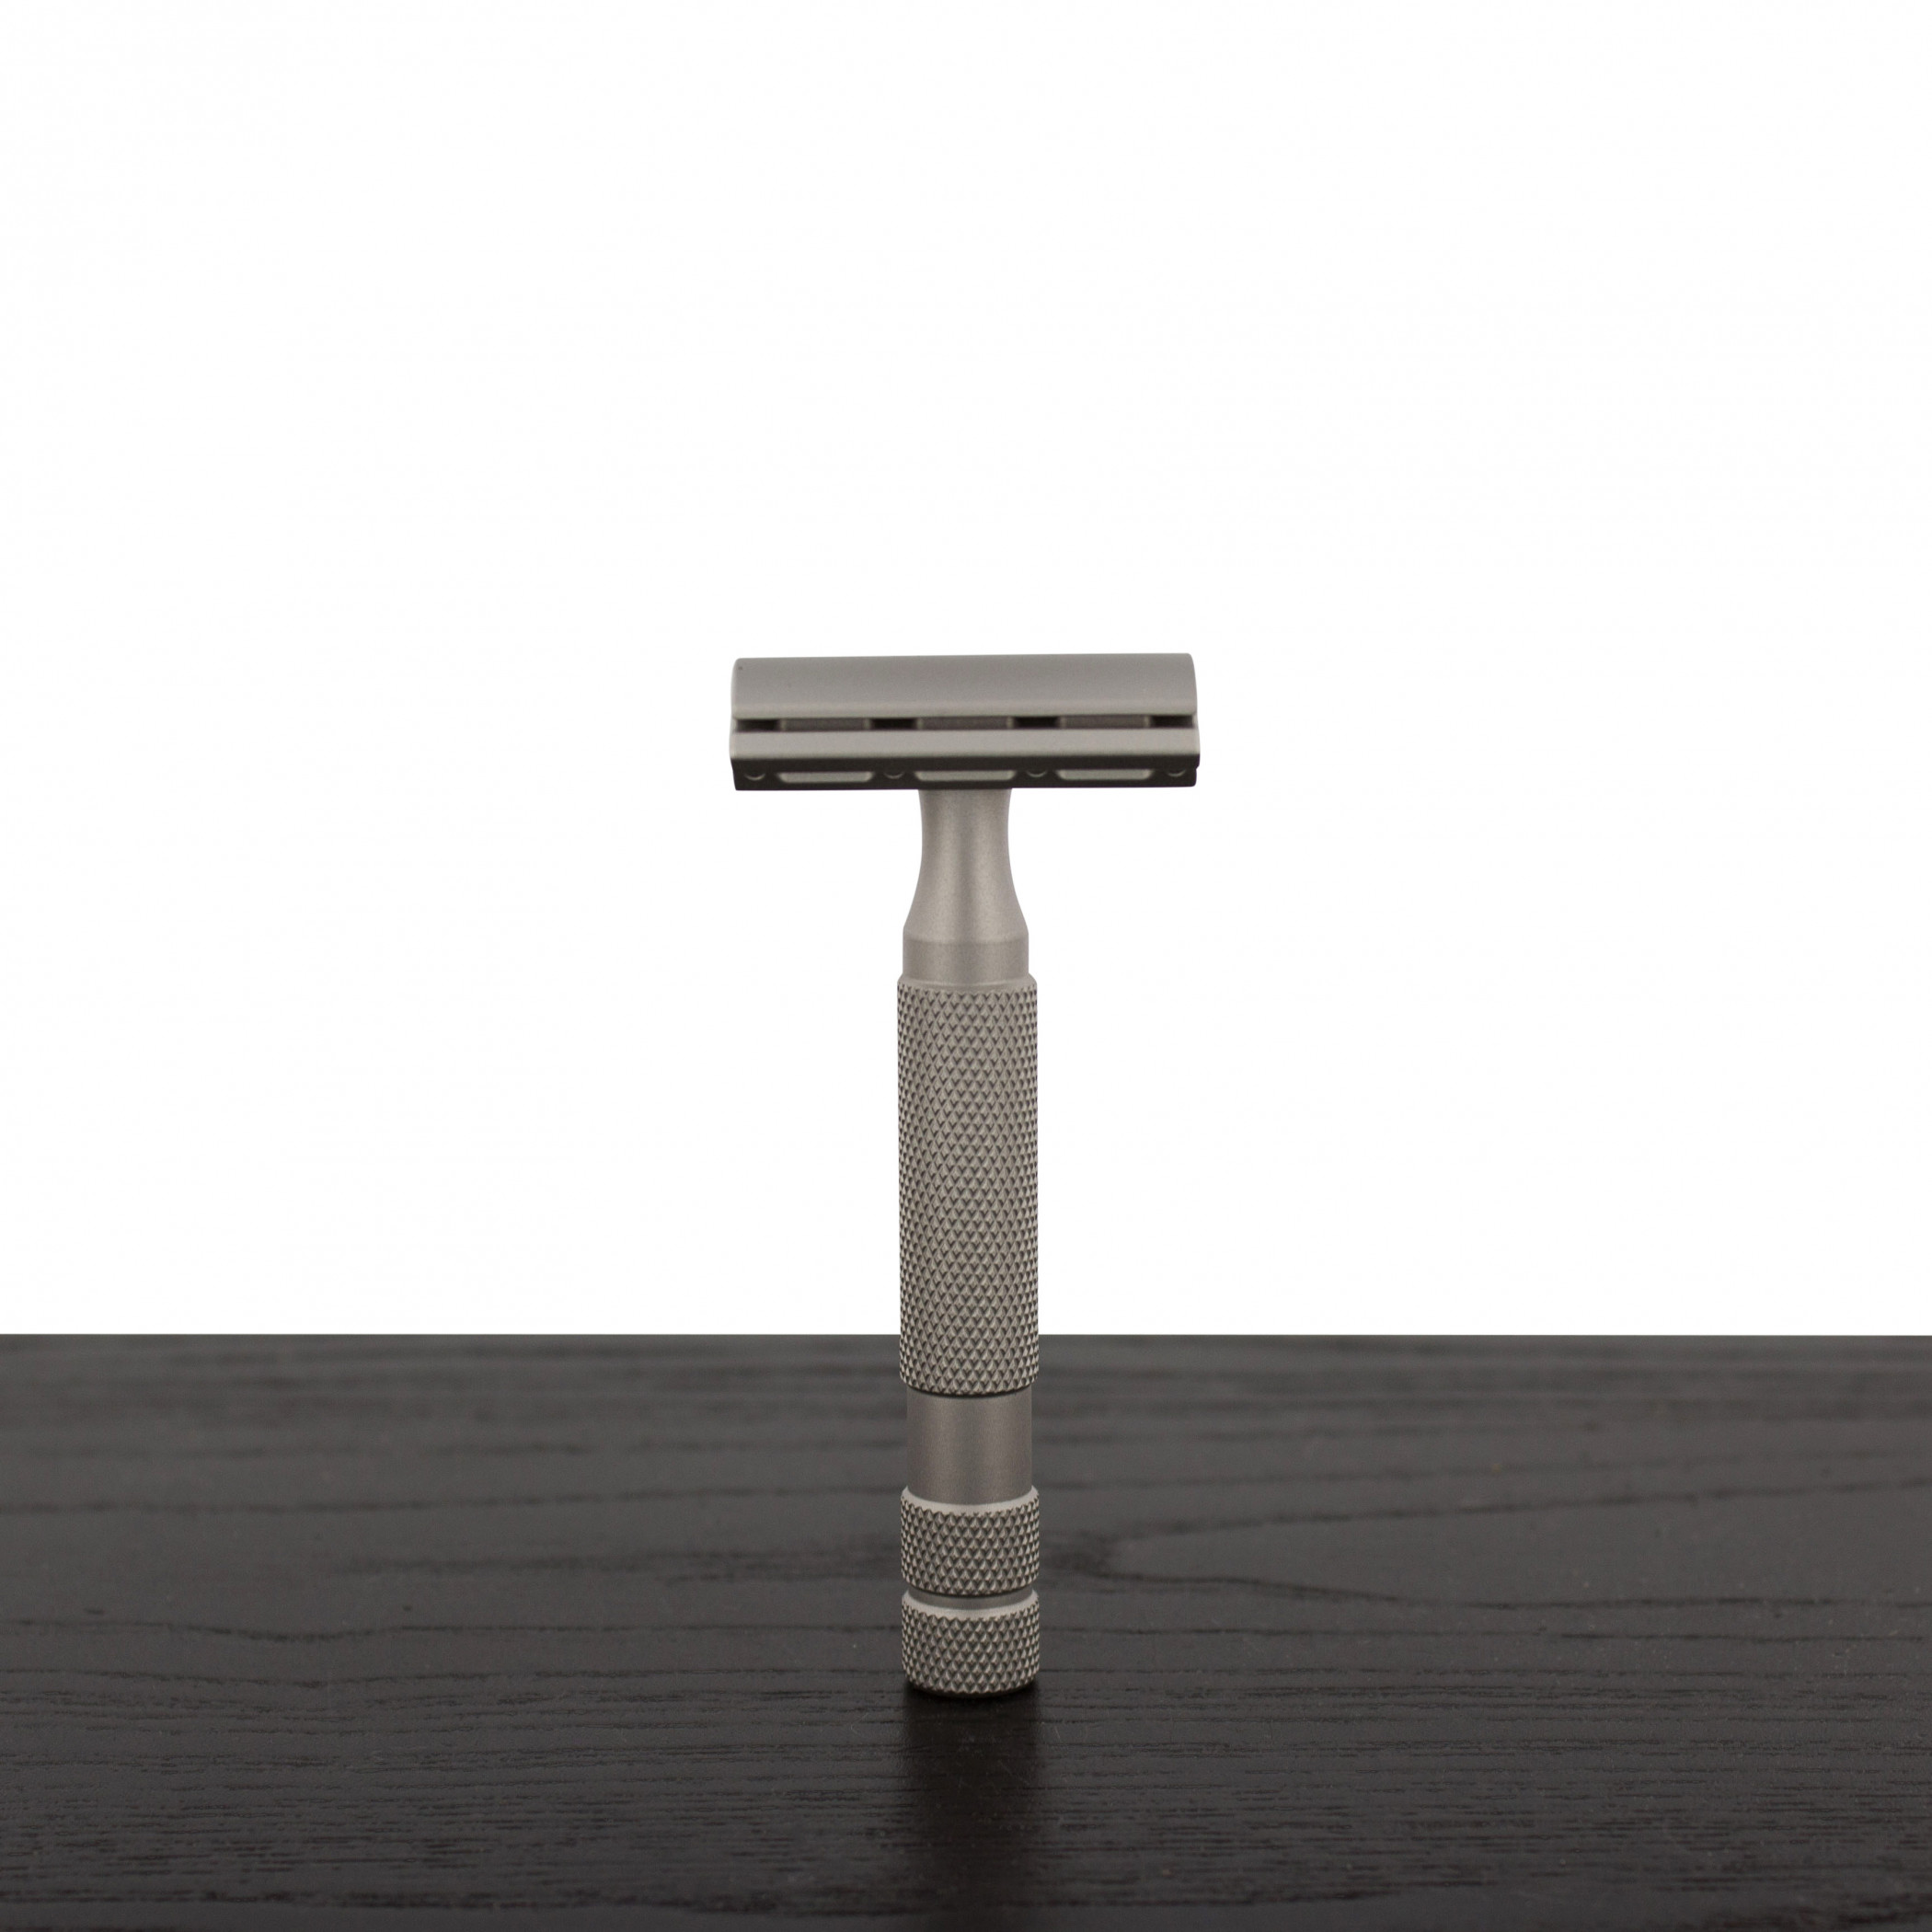 Product image 0 for Rockwell 6S Adjustable Stainless Steel Safety Razor